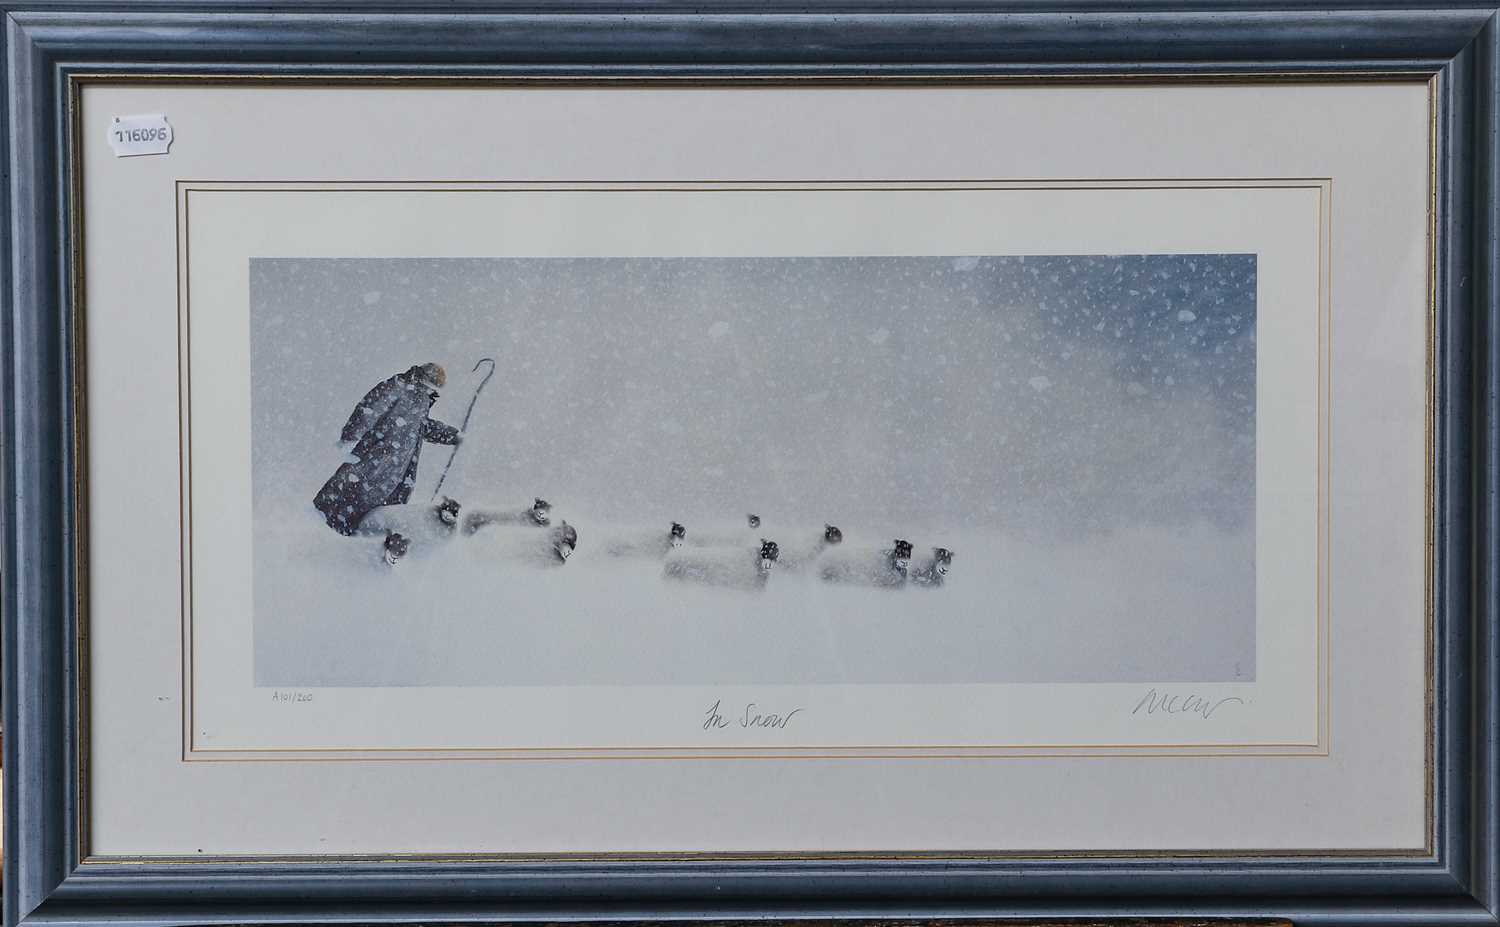 After Mackenzie Thorpe (b. 1956)"In Snow"Signed, inscribed and numbered A101/200, 28cm by 56.5cm - Image 2 of 2